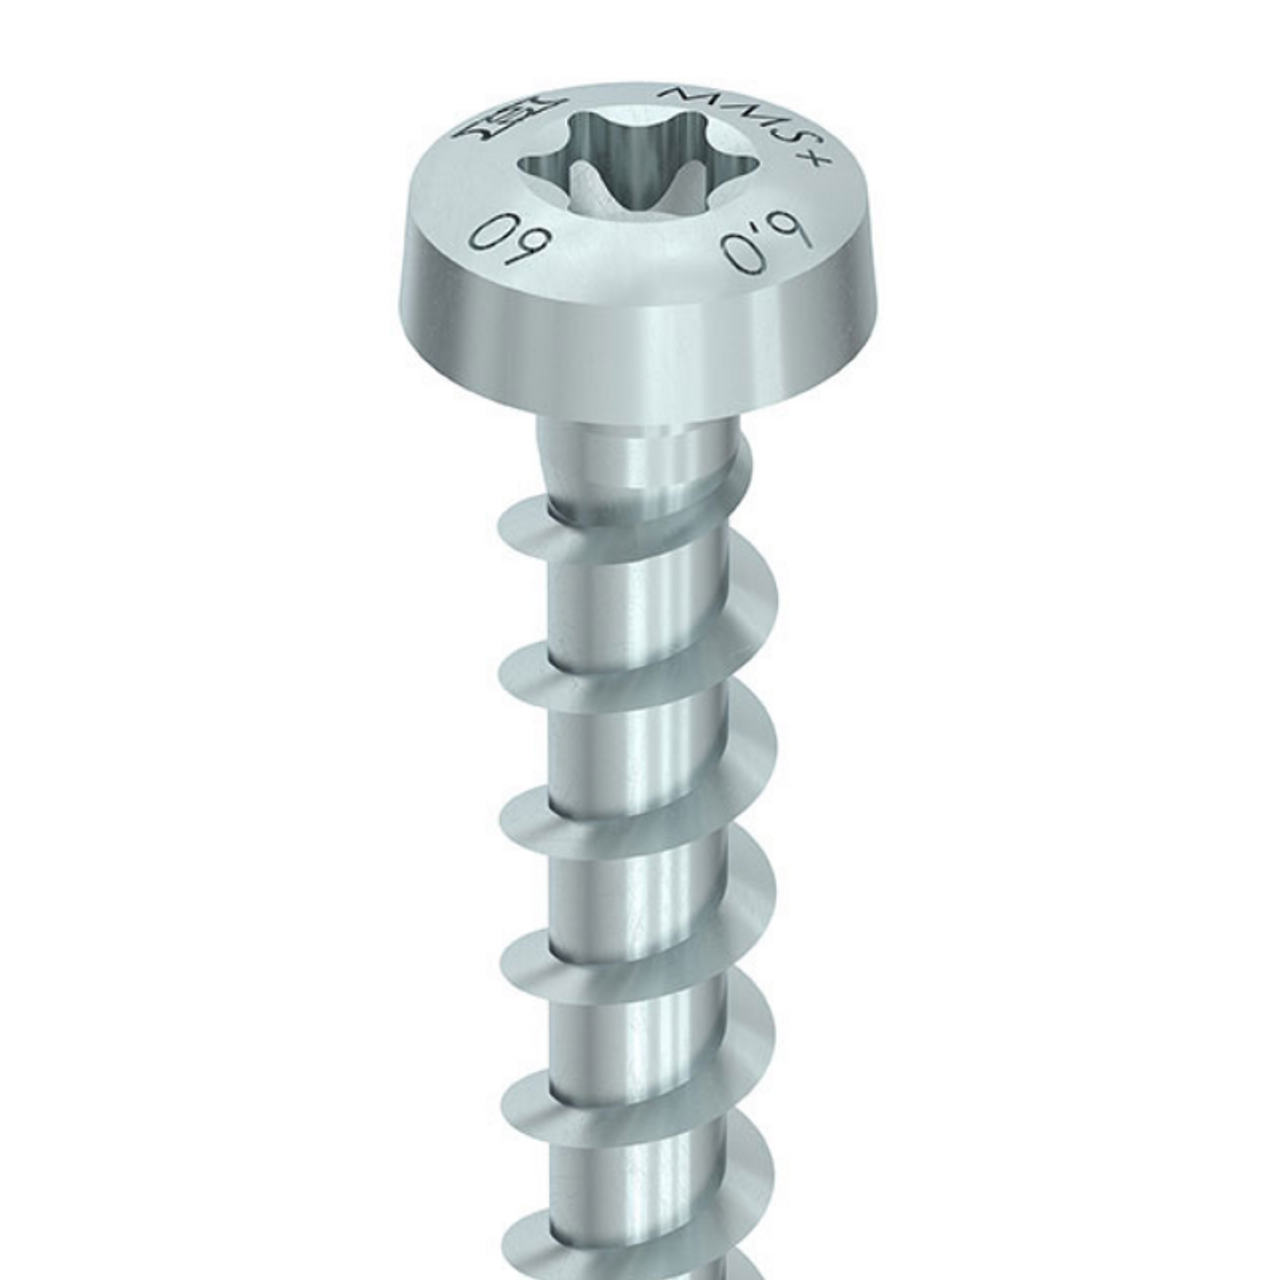 Buy Online HECO 5mm Silver Zinc Pan Head Screw Anchor with Silver Zinc for the Construction Industry and Installers in Victoria and New South Wales.